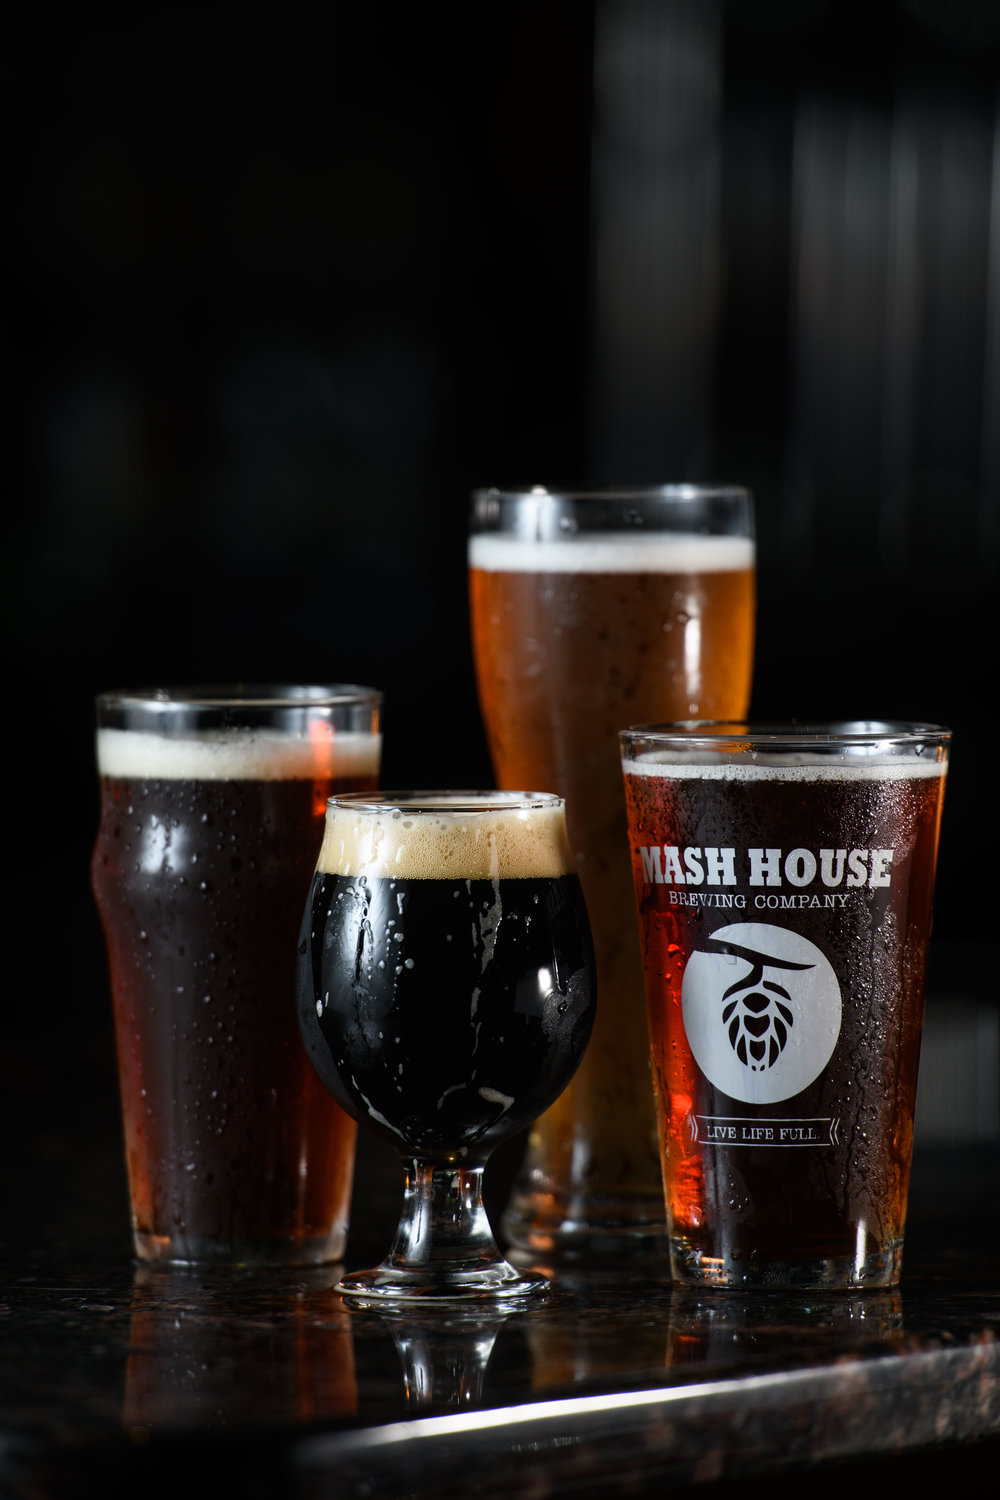 Mash House Brewing Co. prepares for their fall line up of brews. Pictured are the Static Line Stout, Brown Bomber, Oktoberfest, and the 1-2 Punch Hefeweizen.